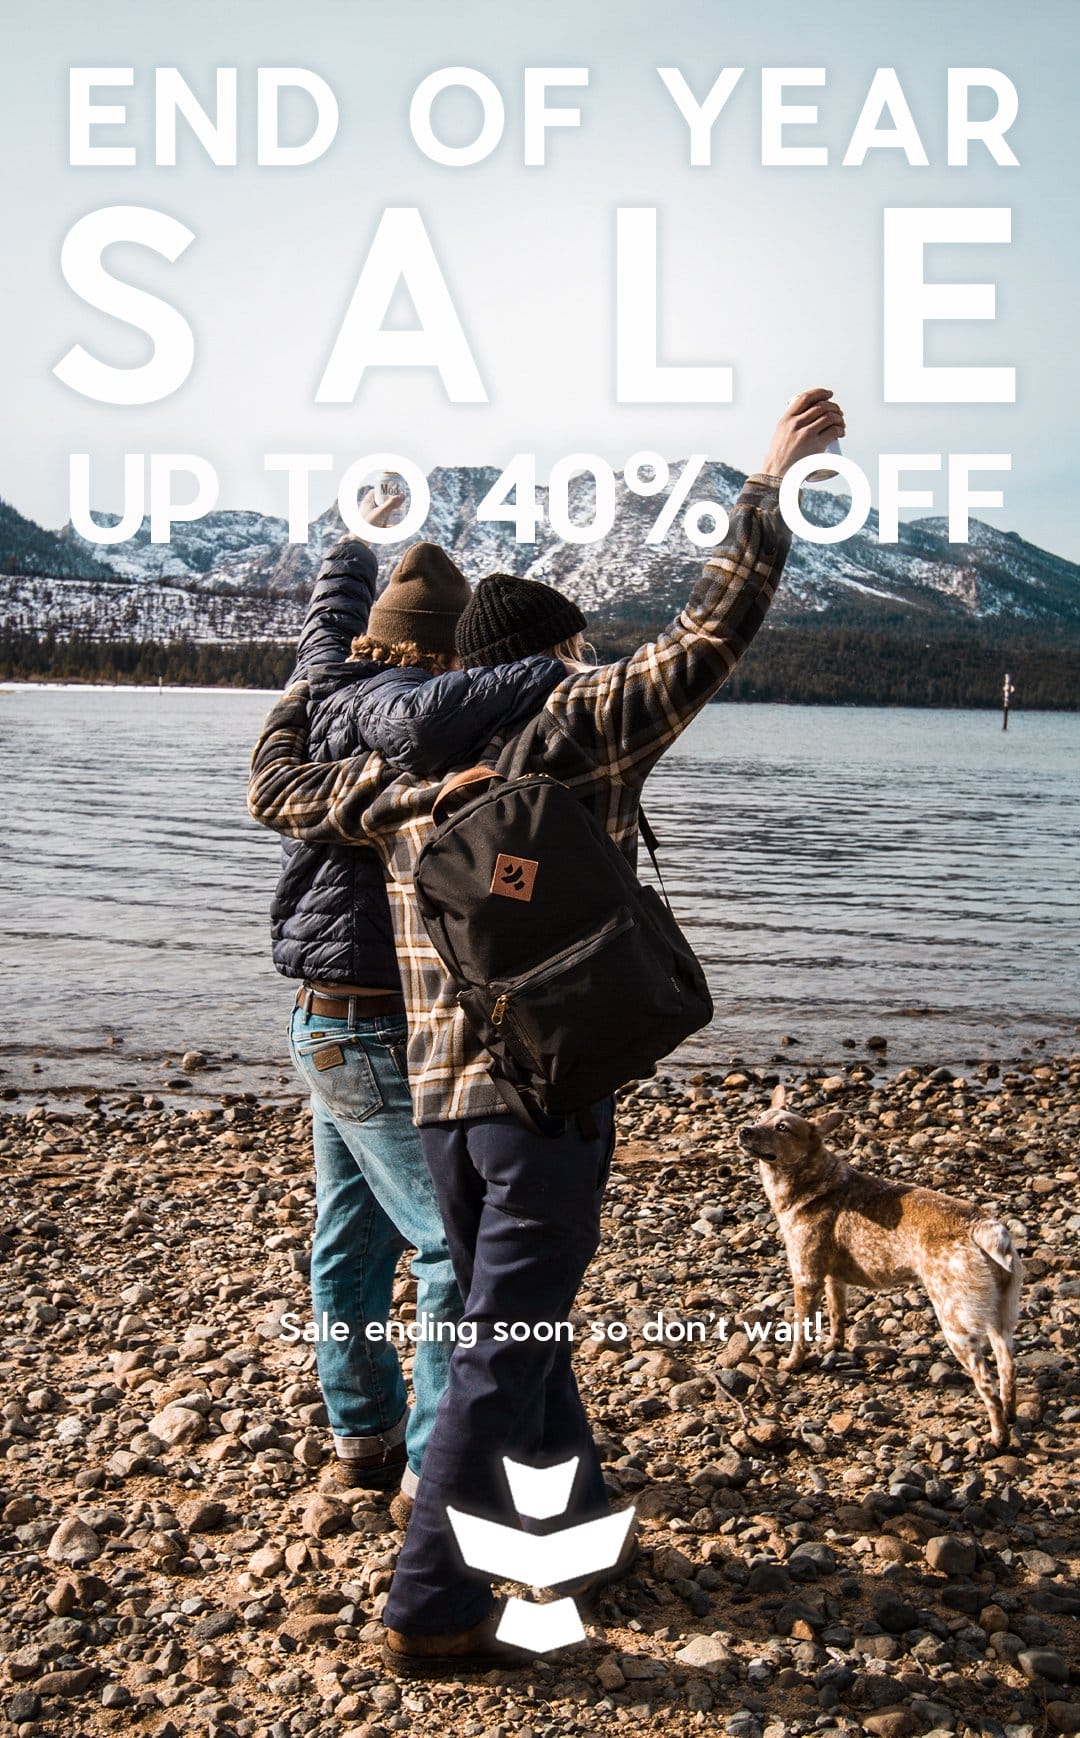 END OF YEAR SALE UP TO 40% OFF